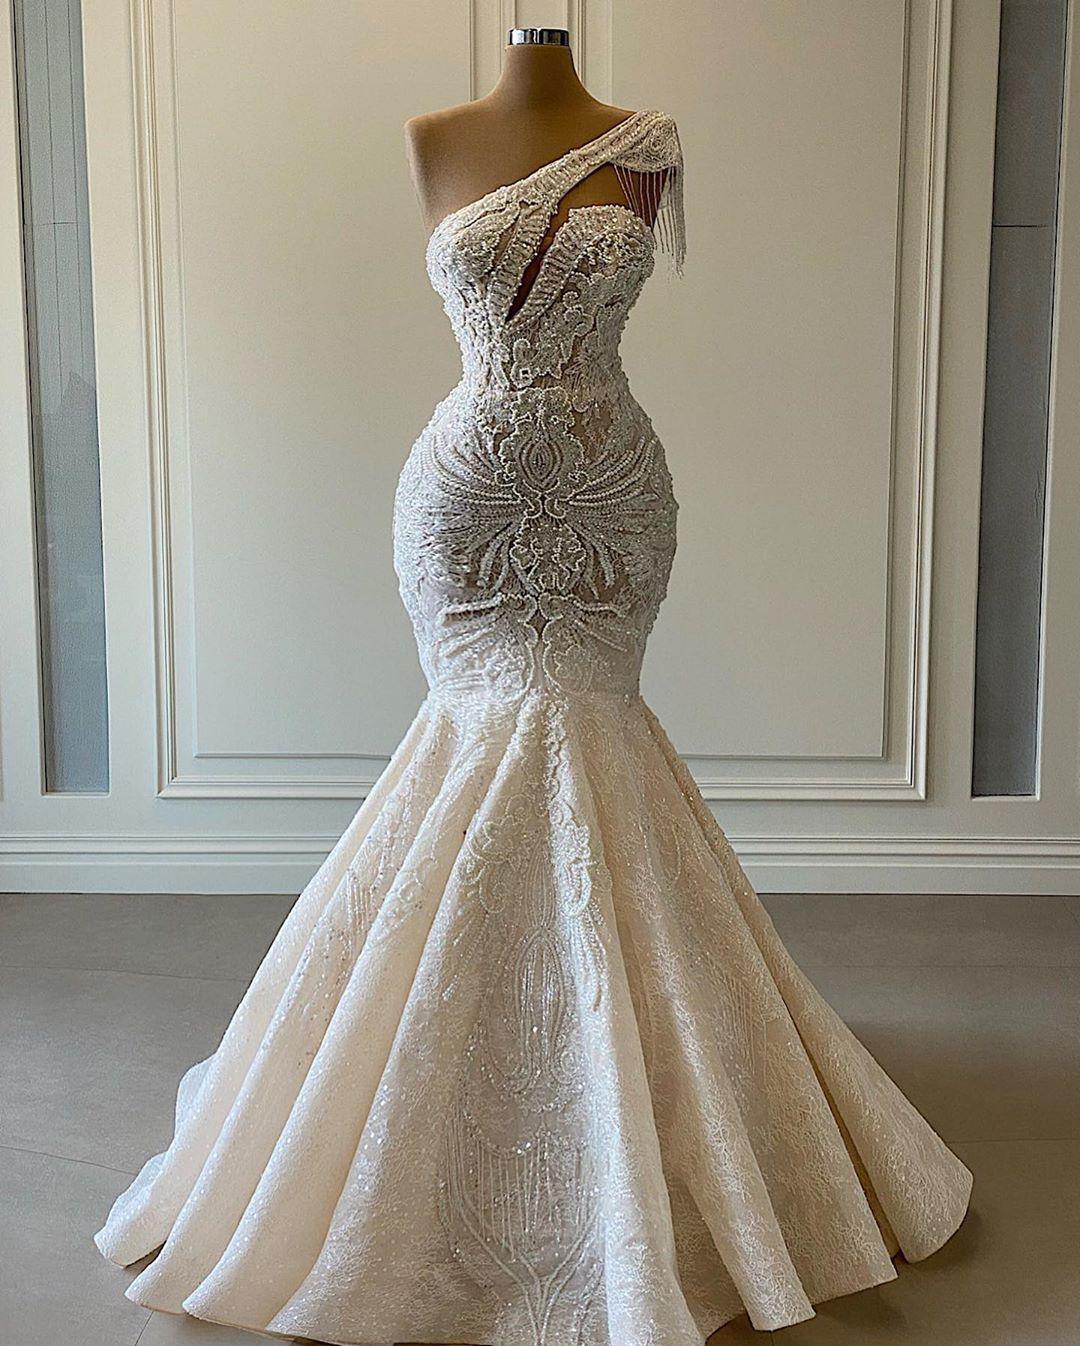 Luxurious Lace Beaded Wedding Dresses One Shoulder Mermaid Bridal Gowns Crystal Beads Sequin Sweep Train SA1247